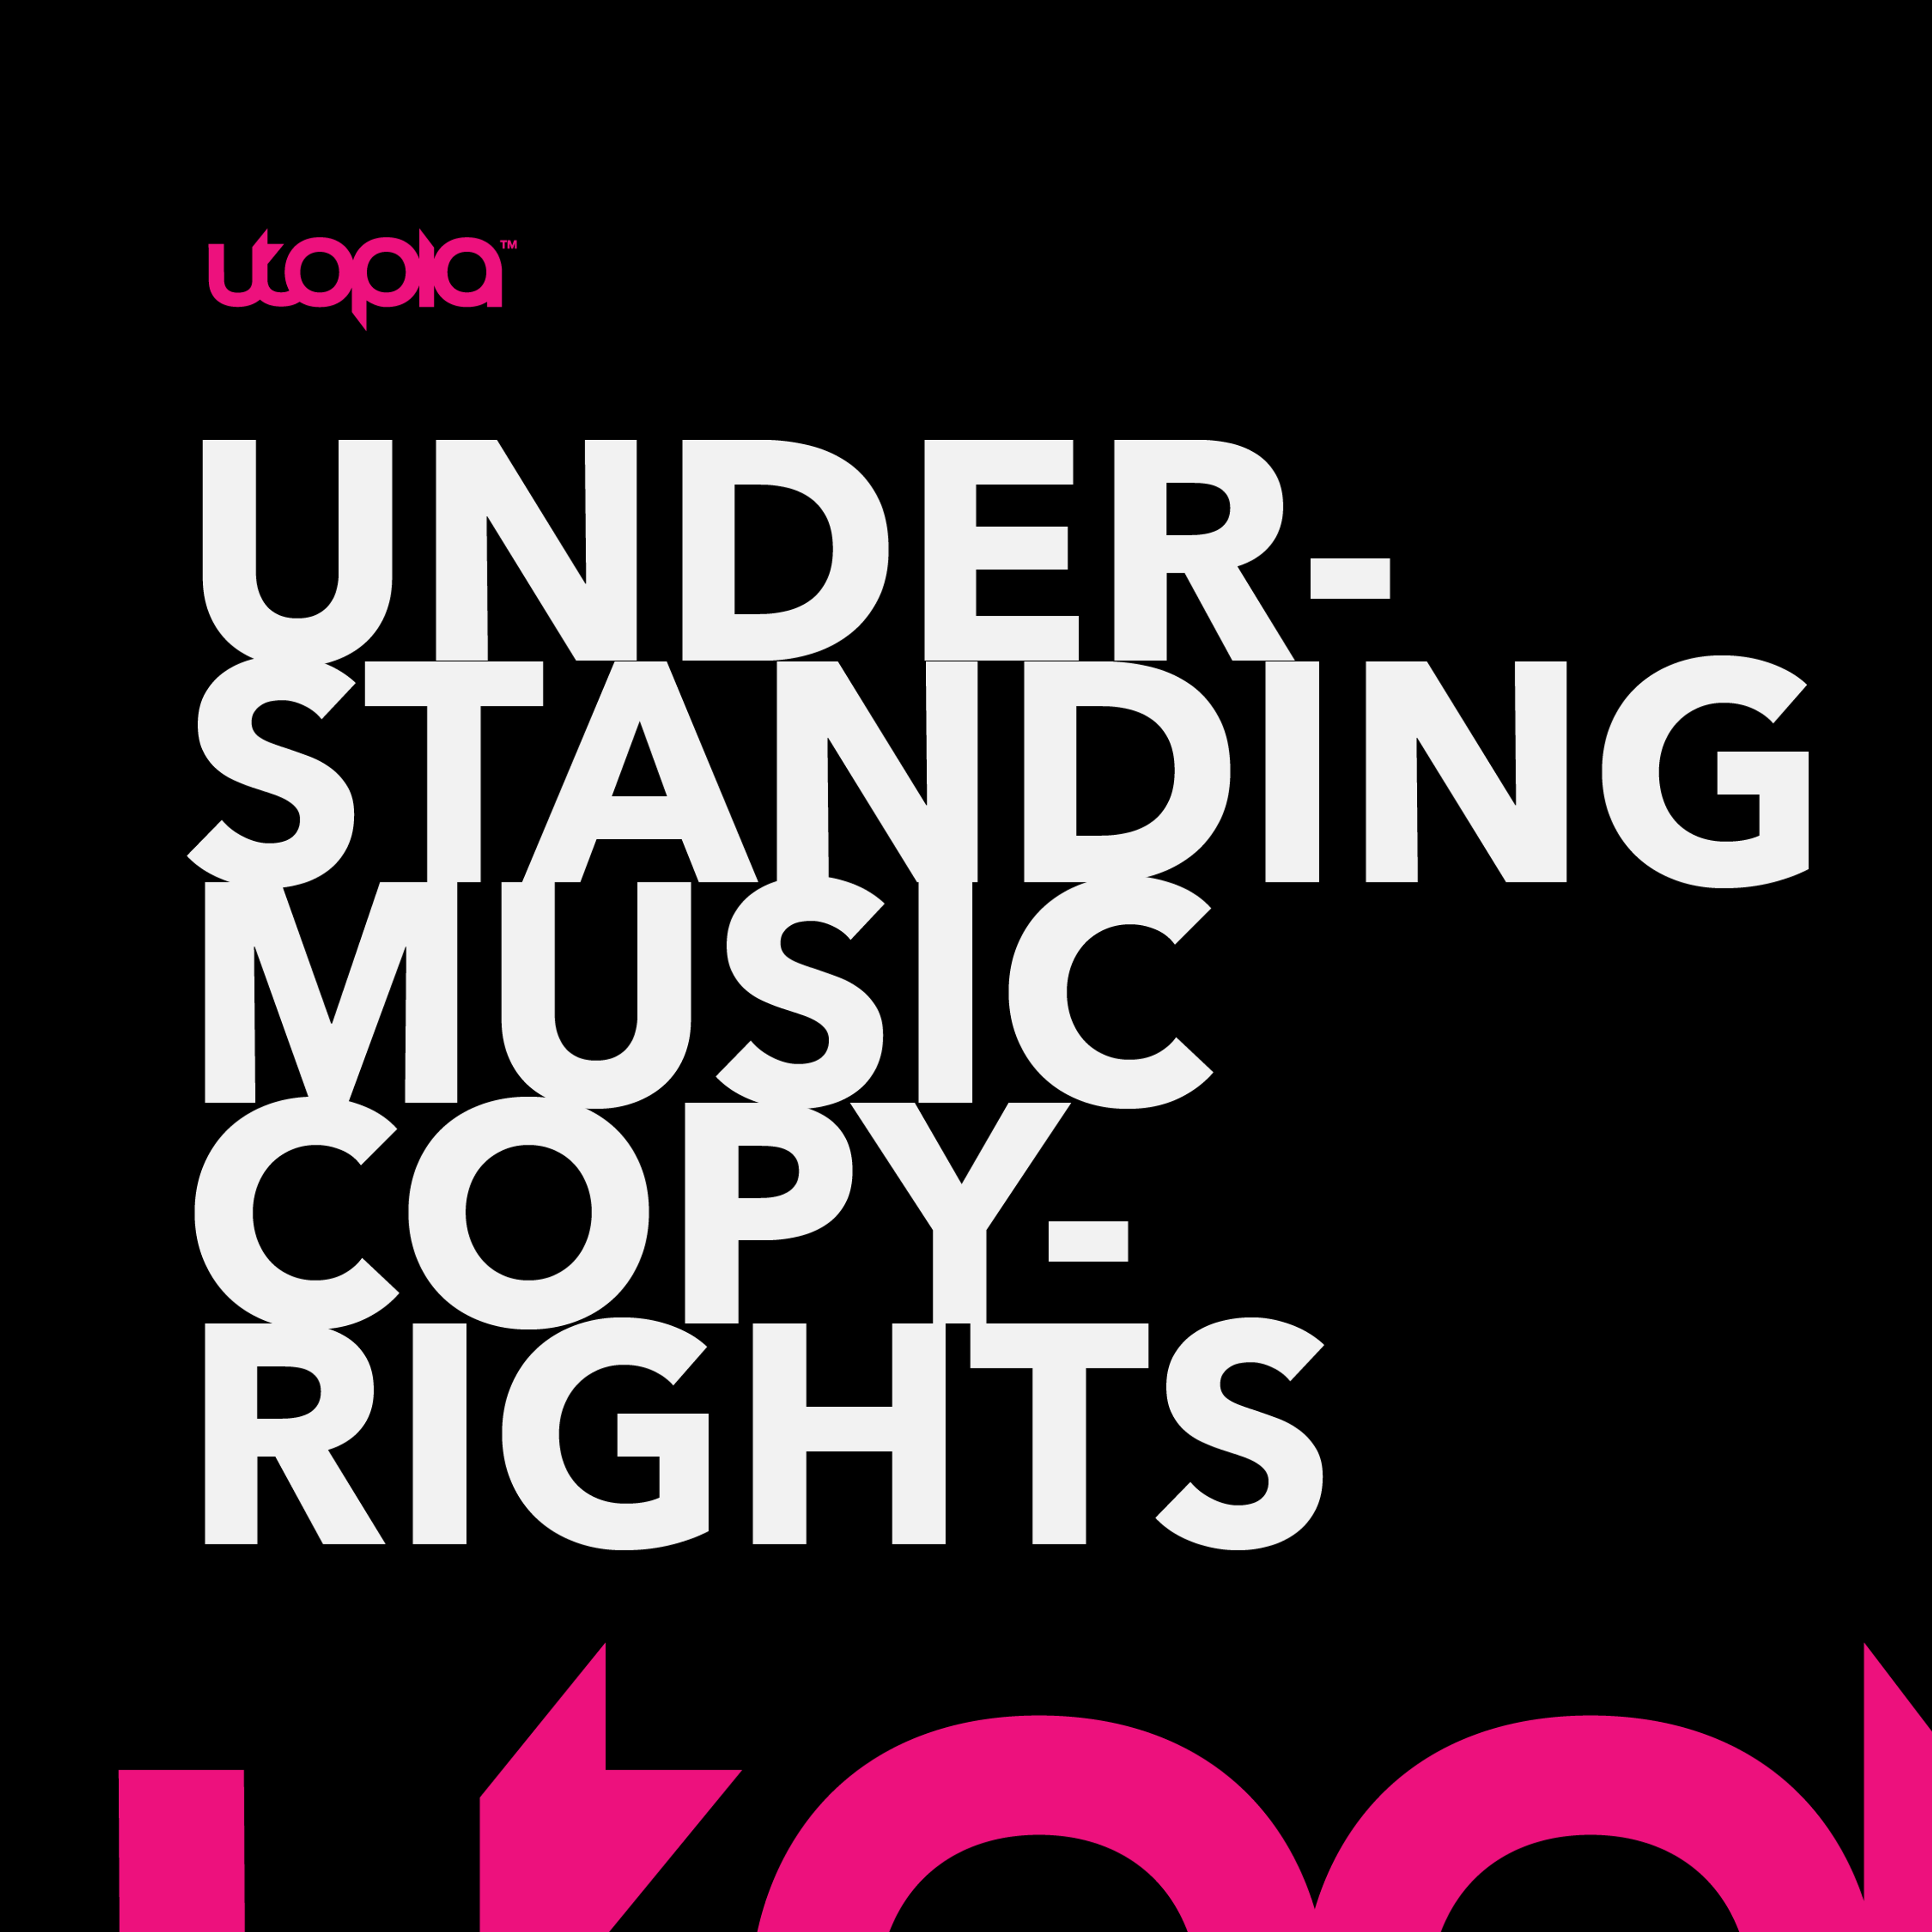 Card image for Understanding Music Copyrights